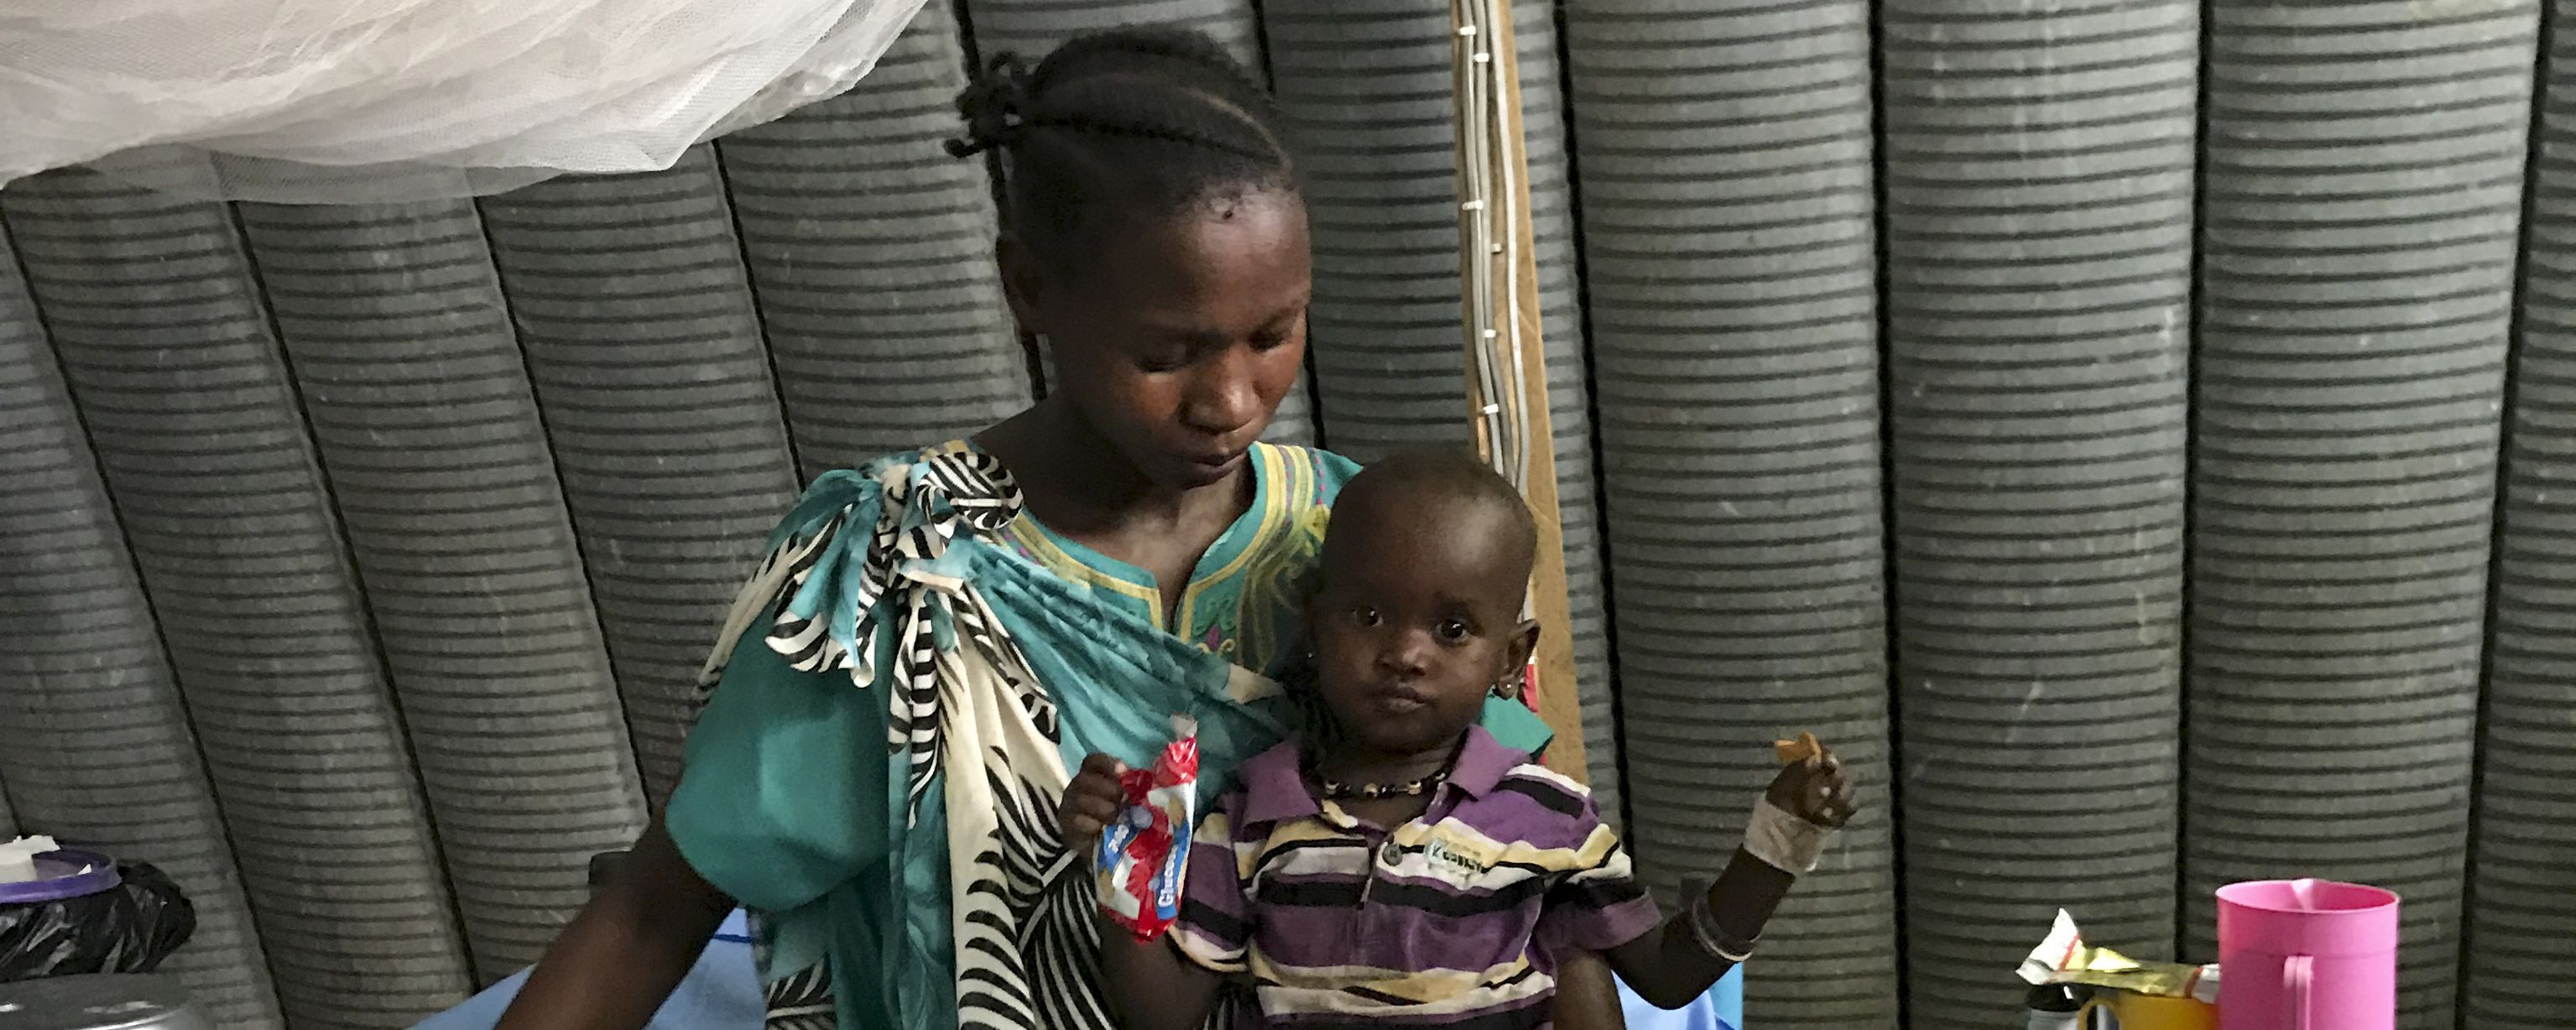 A woman with her child in the International Medical Corps hospital in Juba, South Sudan. Image by Jane Ferguson. South Sudan, 2017.